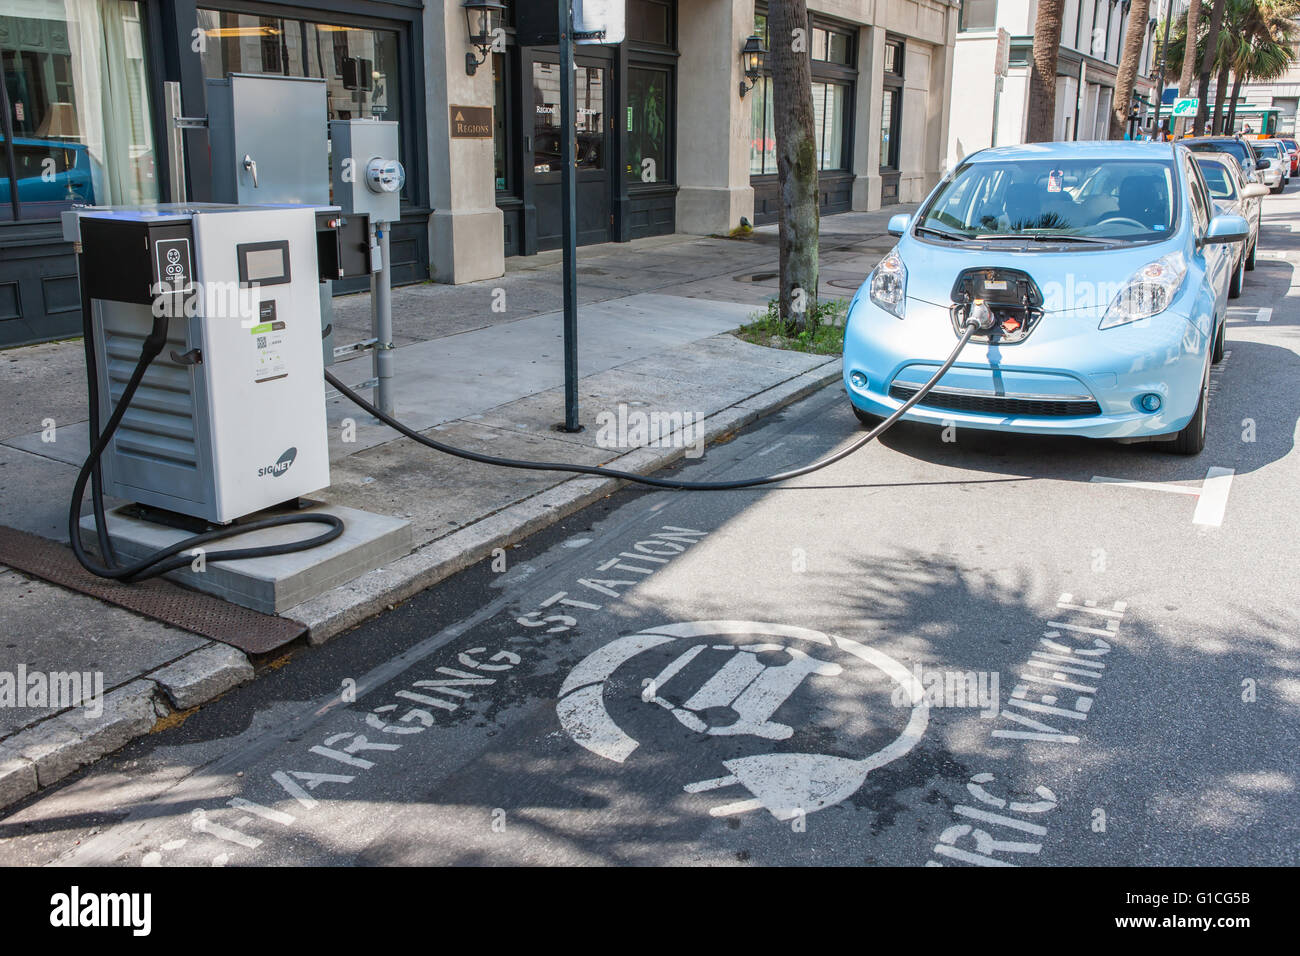 A Nissan Leaf electric car gets a charge from a public SigNet charging station on Bull Street in Savannah, Georgia. Stock Photo